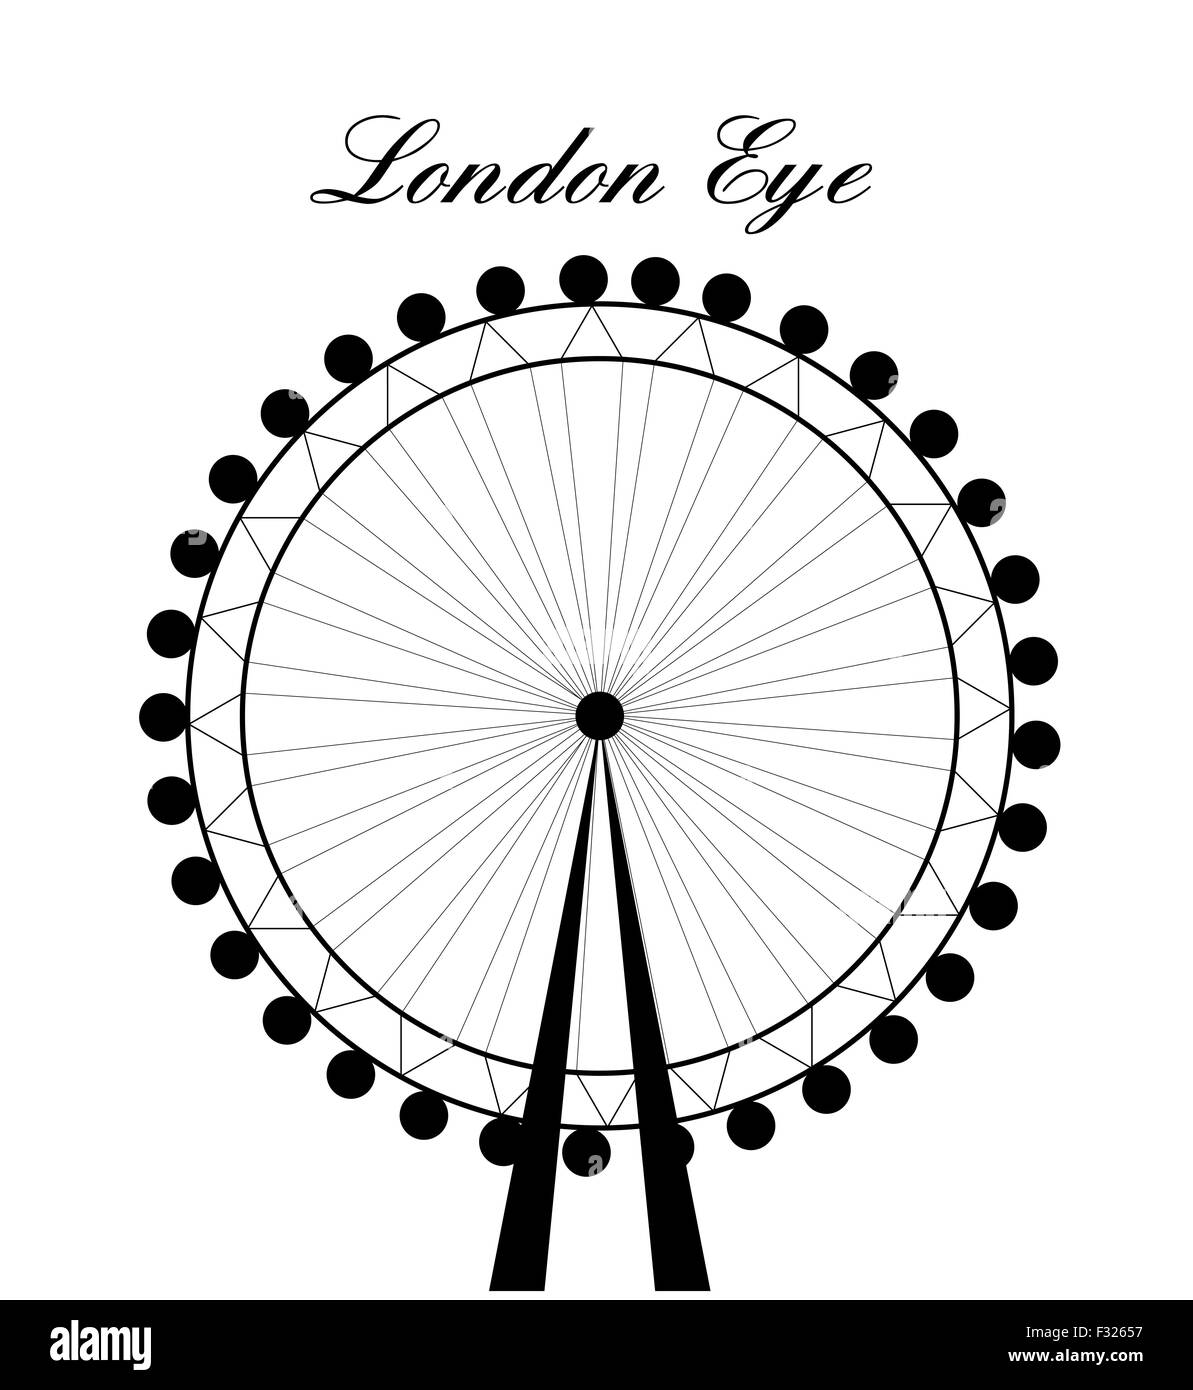 Image of cartoon London Eye silhouette with sign.Vector illustration isolated on white background. Stock Photo